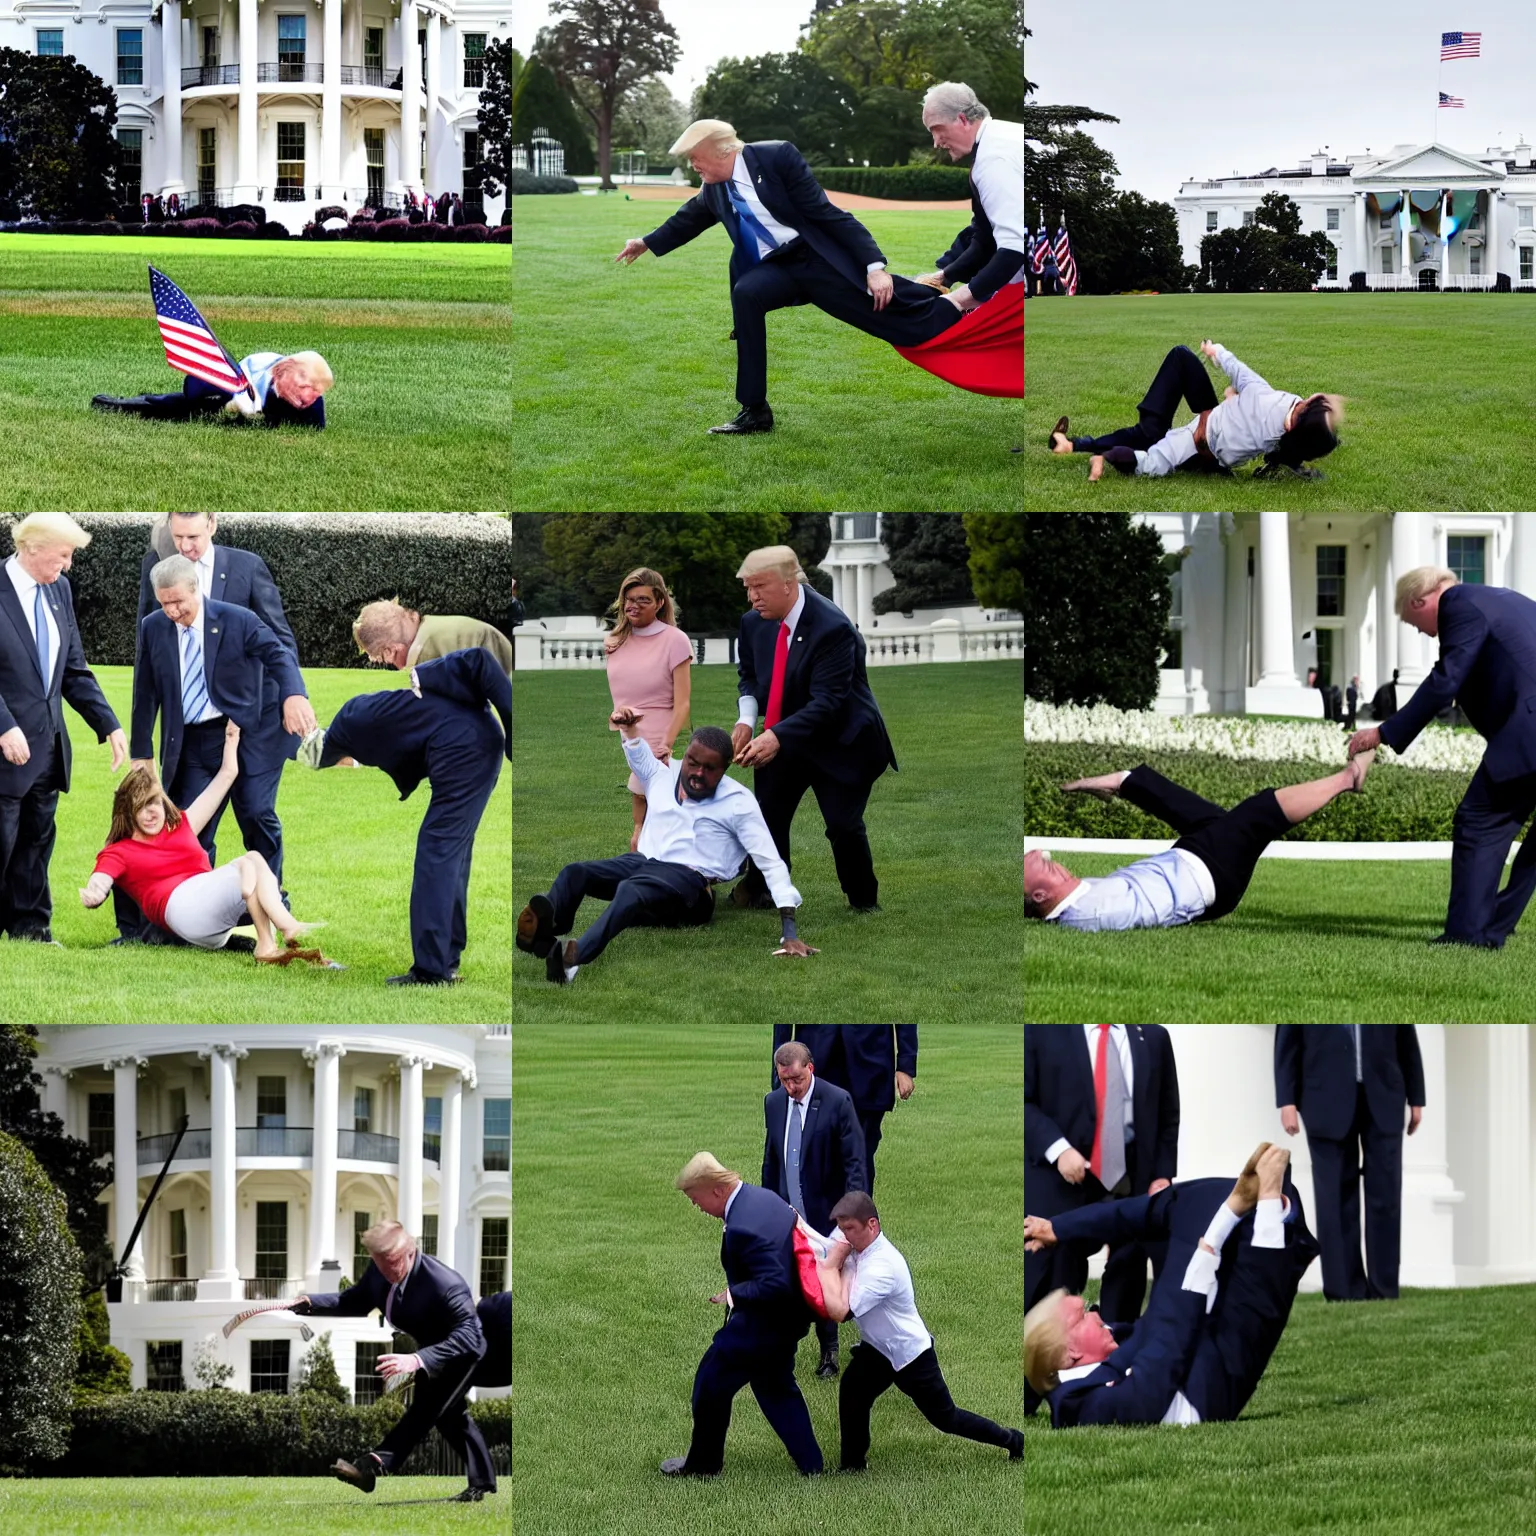 Prompt: United States President Being Dragged on White House Lawn